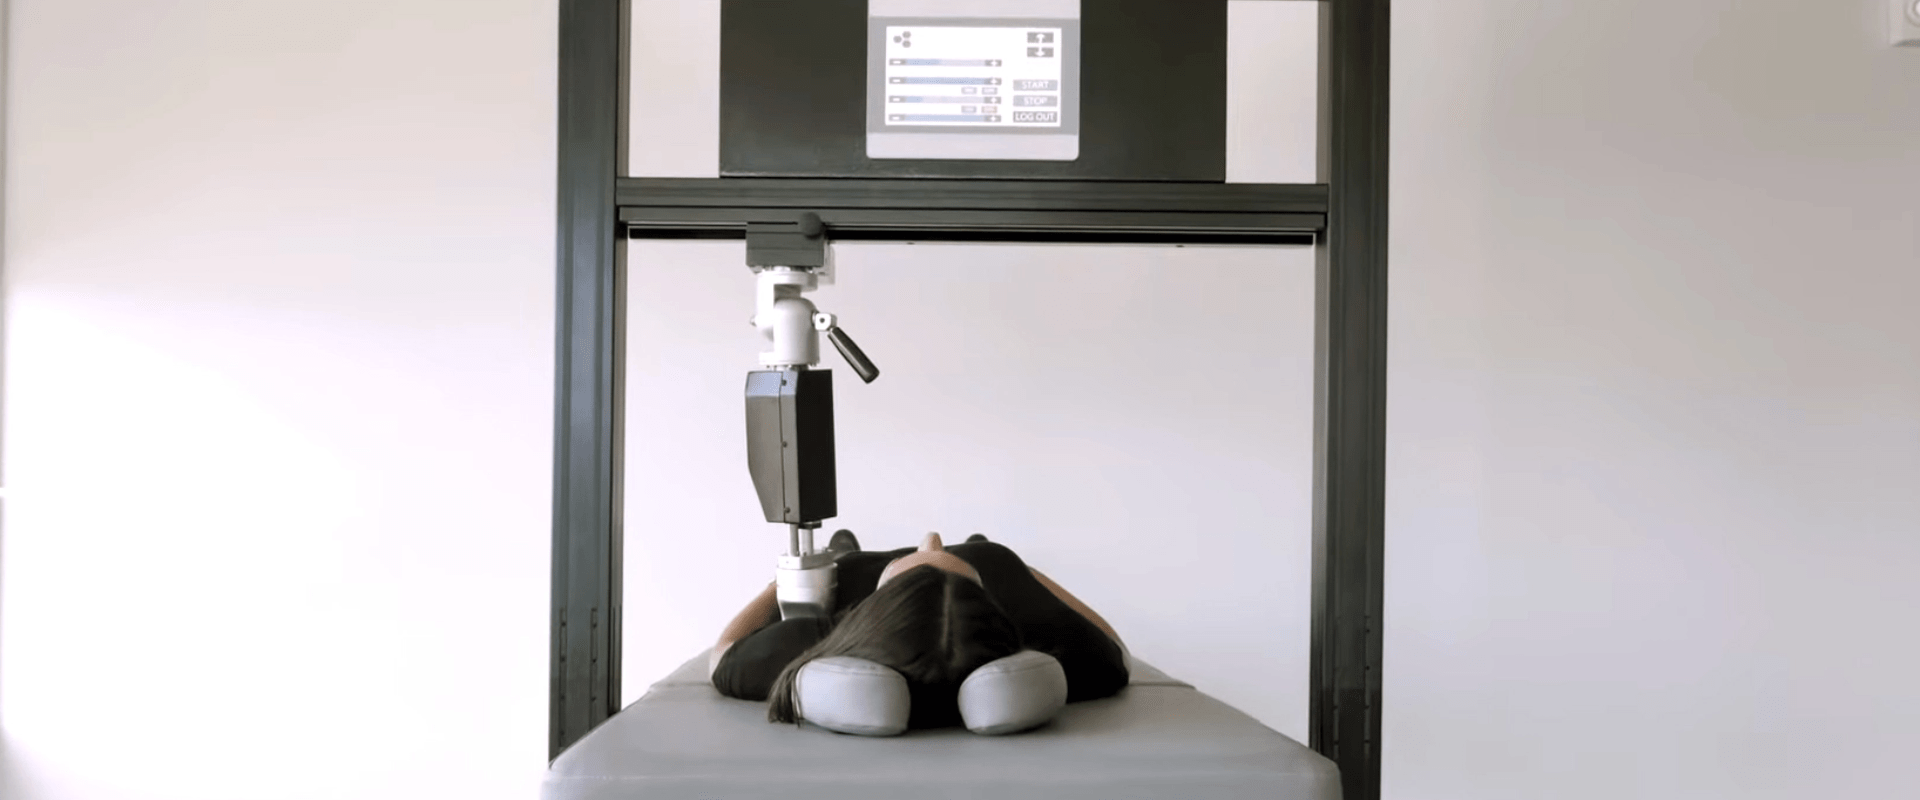 Female patient laying on bed with robotic therapy providing shoulder pain relief